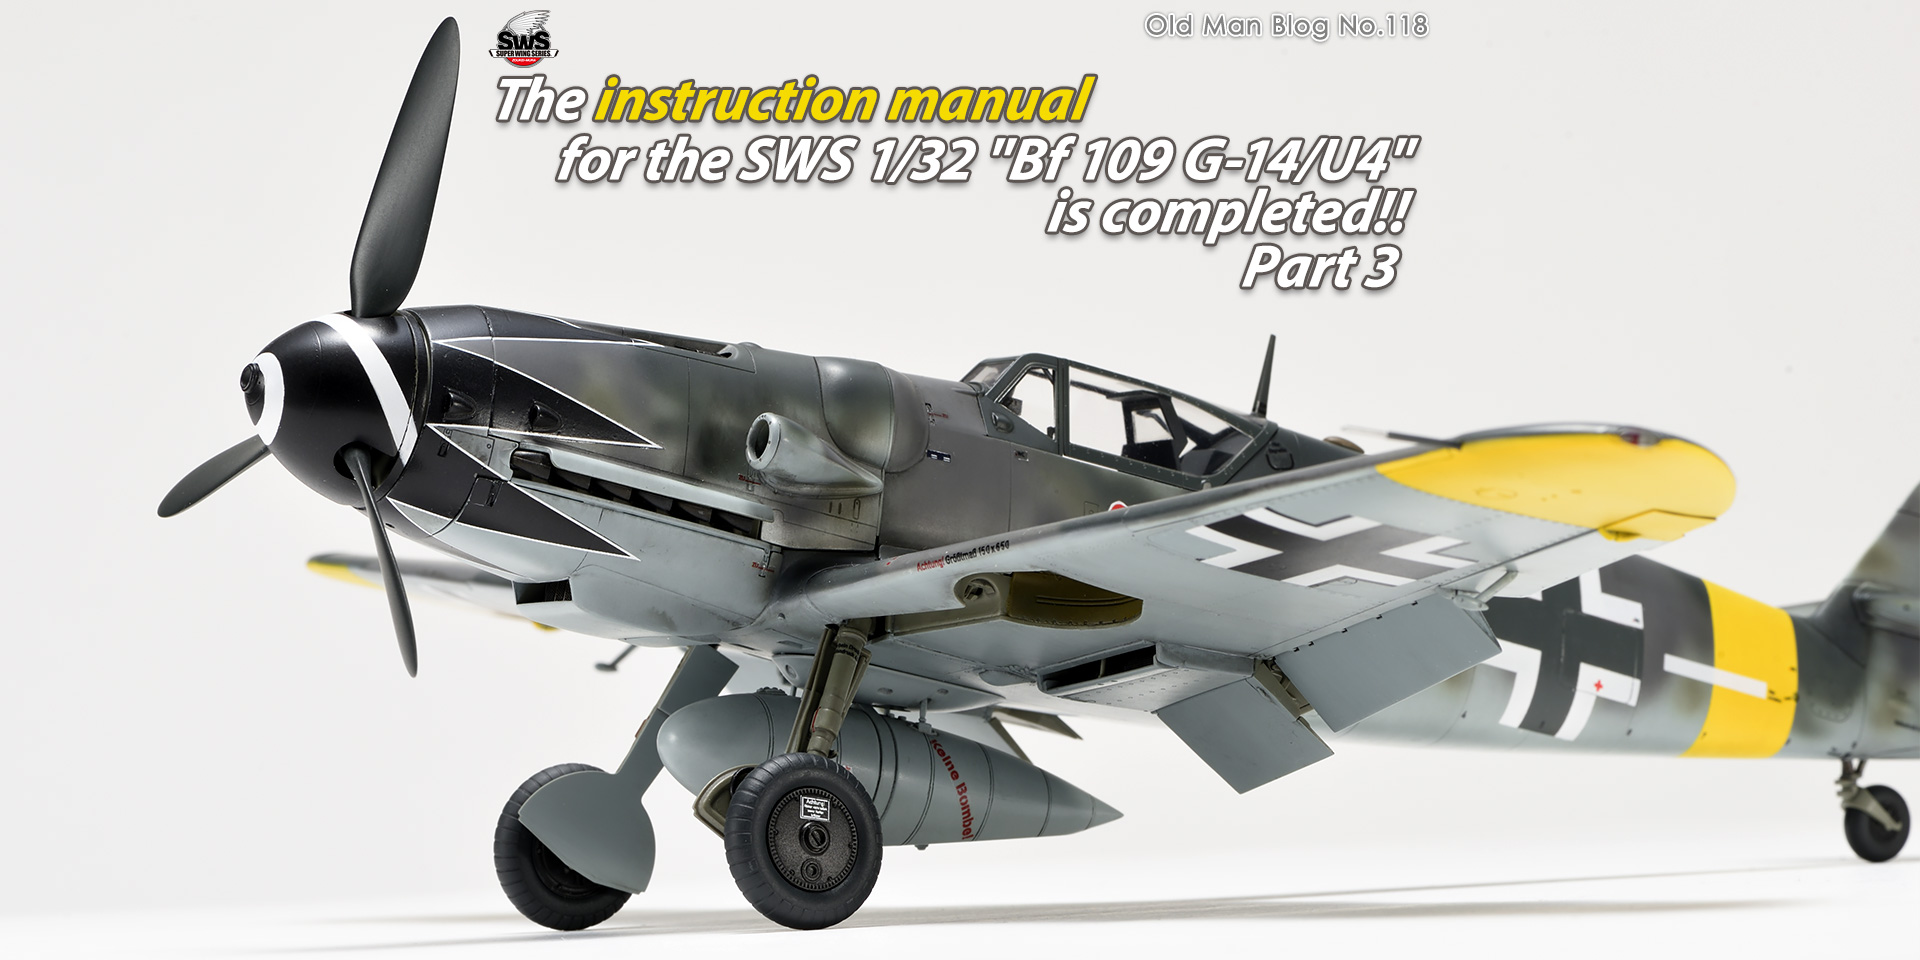 The instruction manual for the SWS 1/32 Bf 109 G-14/U14 is completed!! Part 3